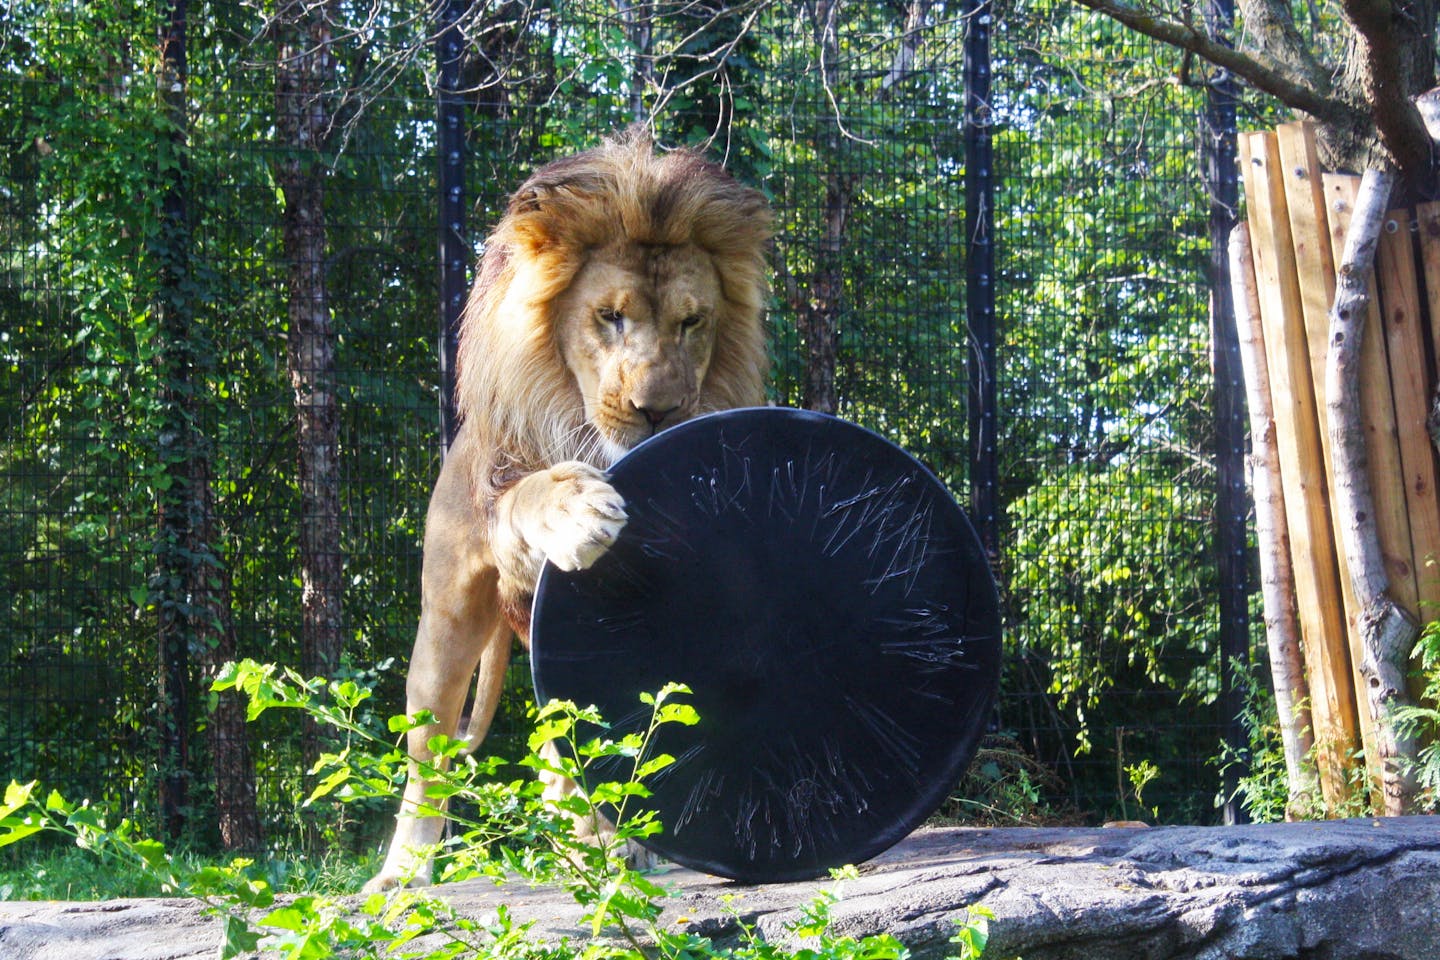 A lion uses its paw to maneuver a large disclike object